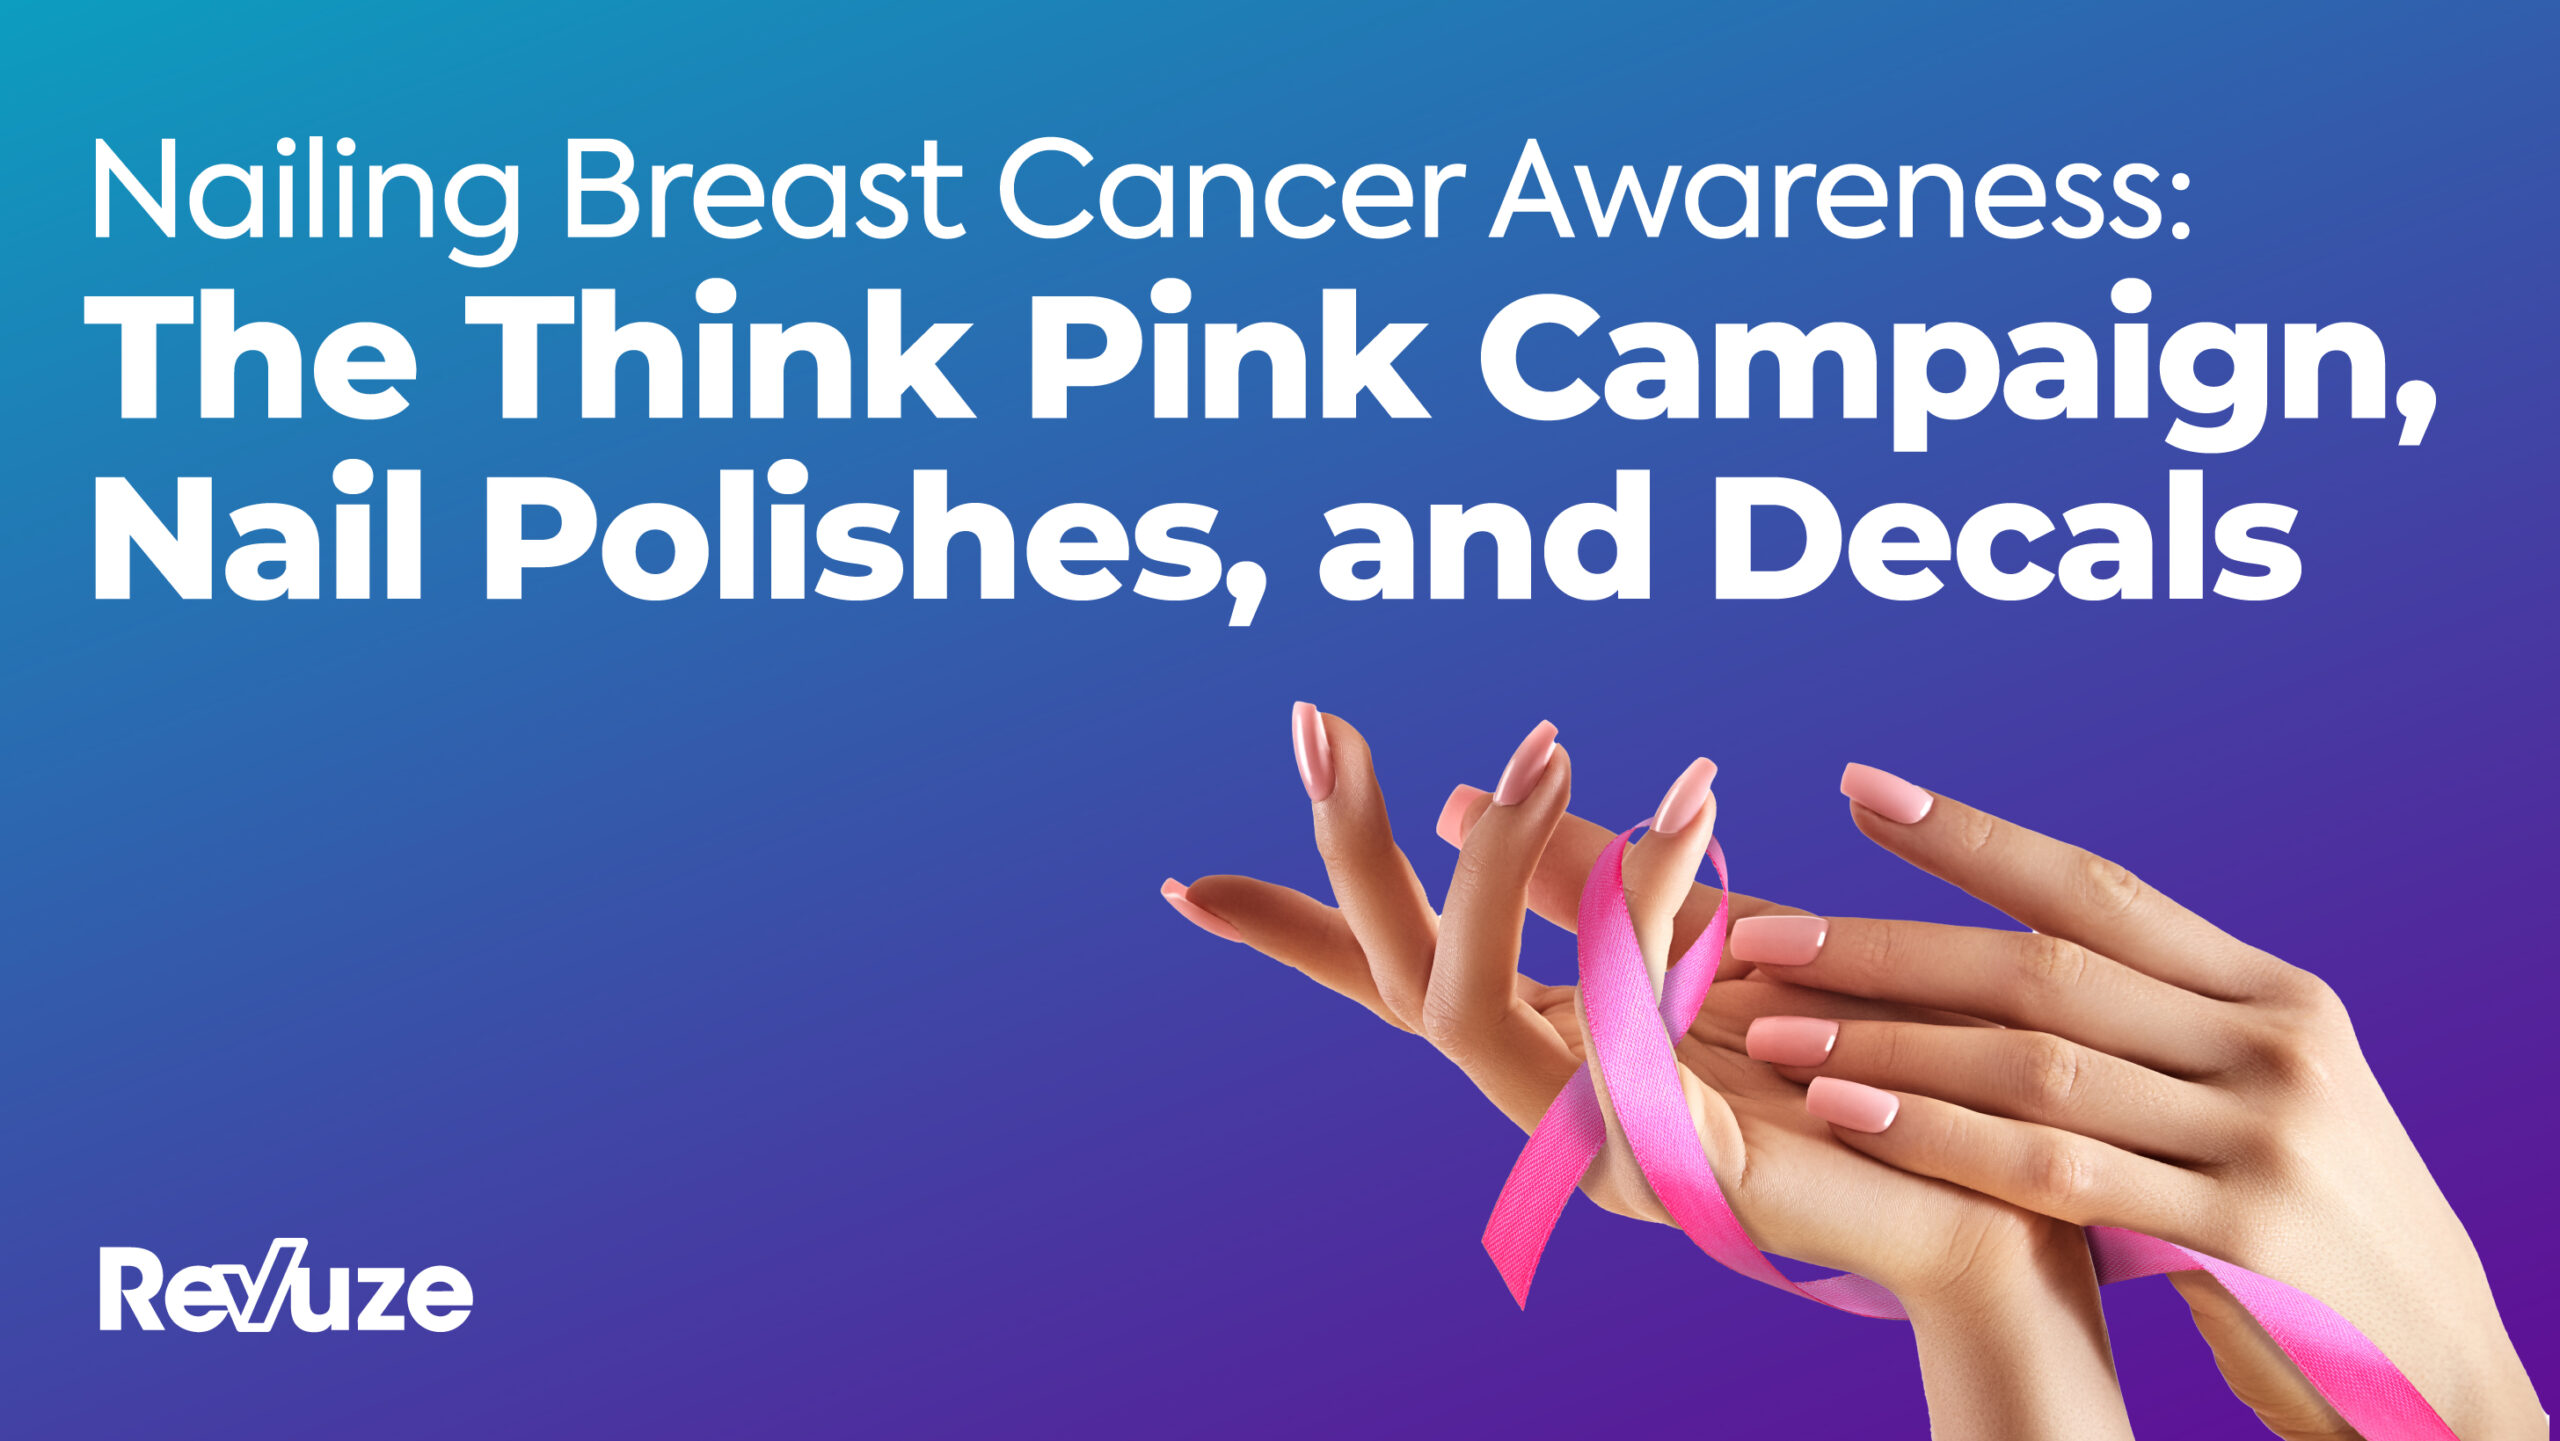 Nailing Breast Cancer Awareness: The Think Pink Campaign, Nail Polishes, and Decals